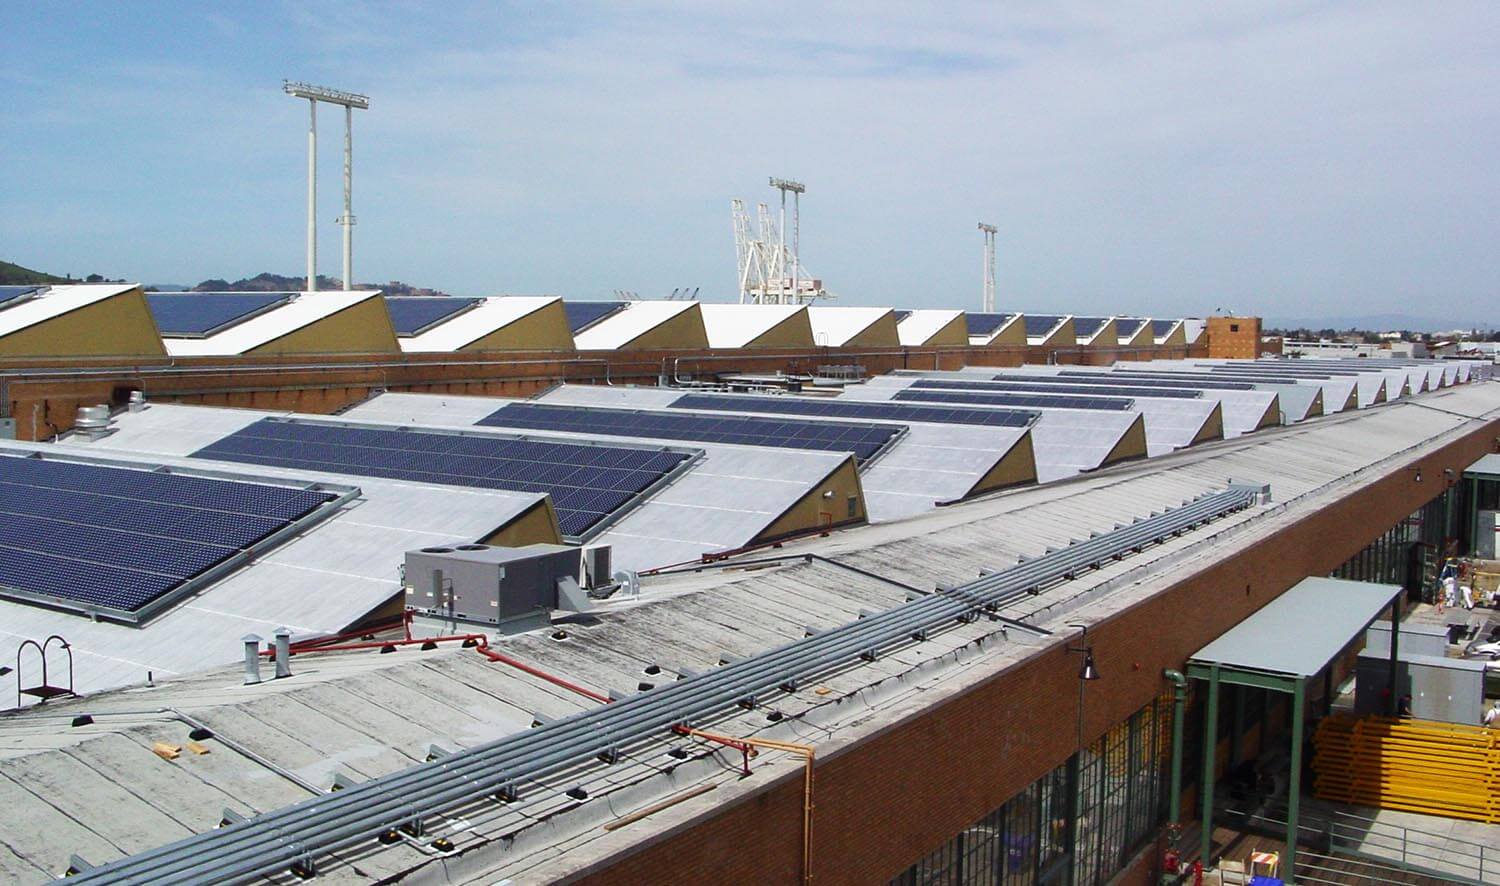 Exterior view of Ford Assembly Building, Richmond, CA showing sawtooth roof pattern and solar panels